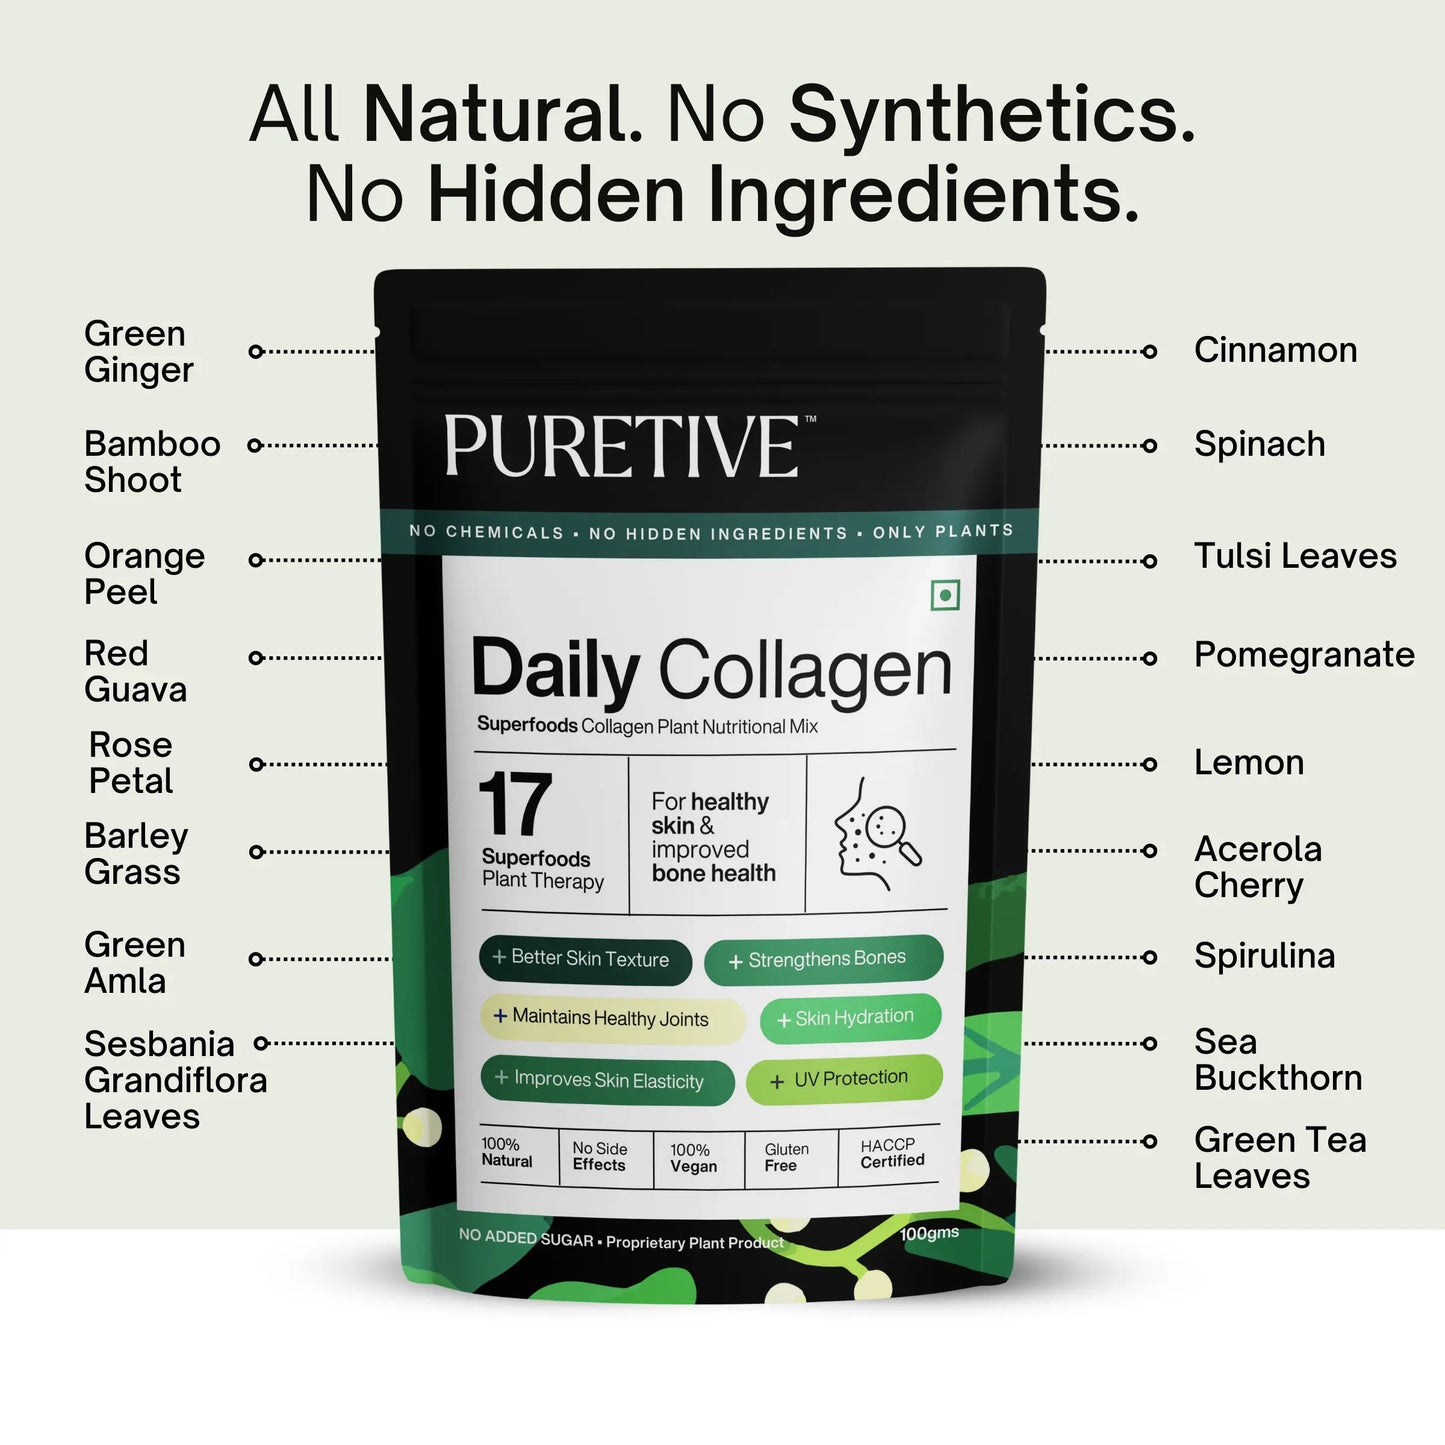 Picture of ingredients that goes in side Puretive's Daily Collagen Nutrition Mix as we believe in Transparency. Puretive's Daily Collagen Nutrition Mix comes is a 100% Pure blend of green ginger, bamboo shoot, orange peel. red guava, rose petal, barley grass, green amla, sesbania grandiflora leaves, cinnamon, spinach, tulsi leaves, pomegranate, lemon, acerola cherry, spirulina, sea buckthorn & green tea leaves